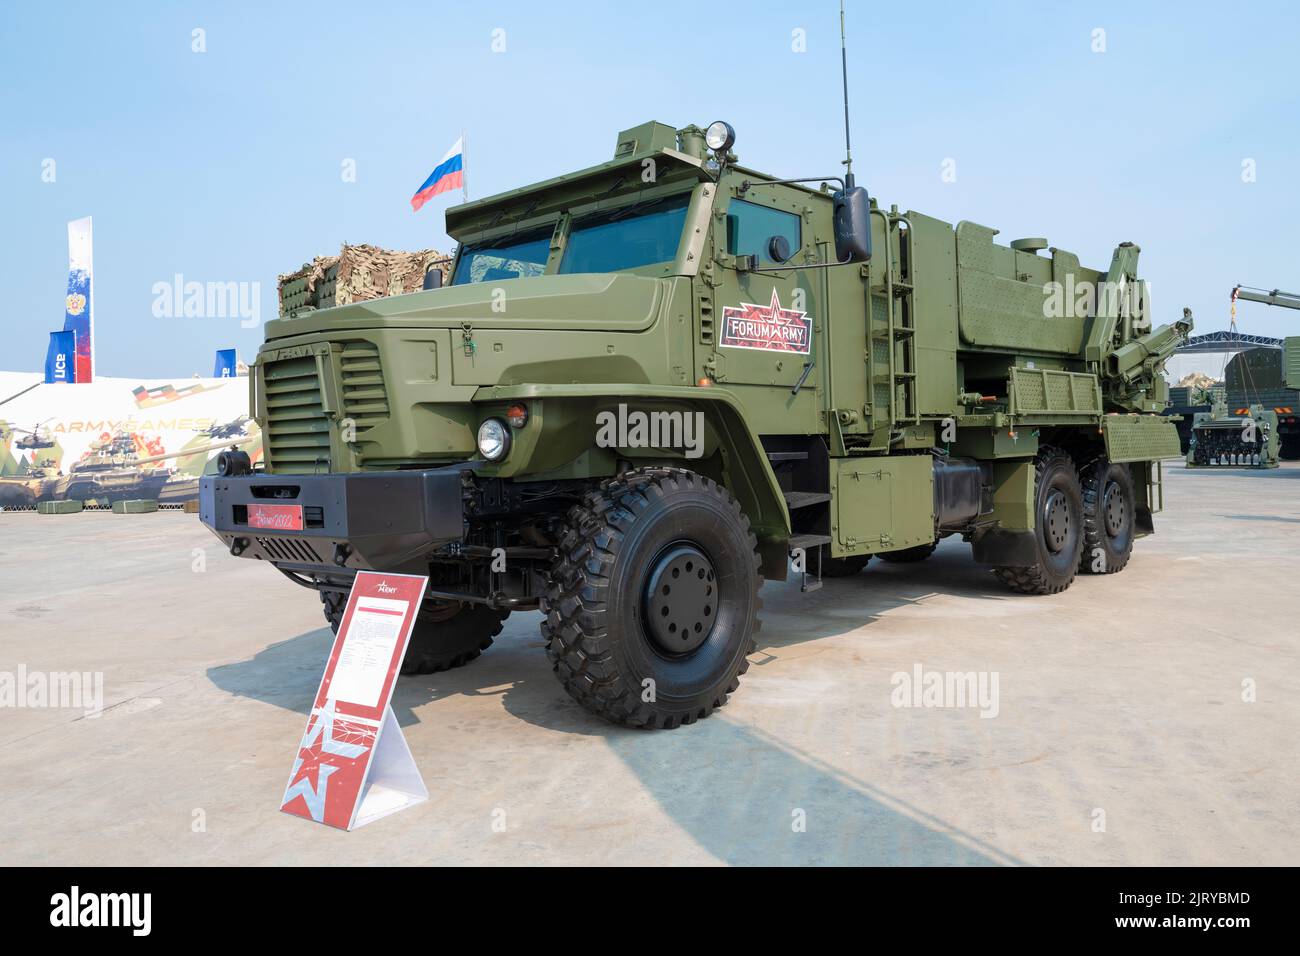 MOSCOW REGION, RUSSIA - AUGUST 18, 2022: Heavy flamethrower system TOS-2 based on the Ural truck. Exhibit of the international military-technical foru Stock Photo